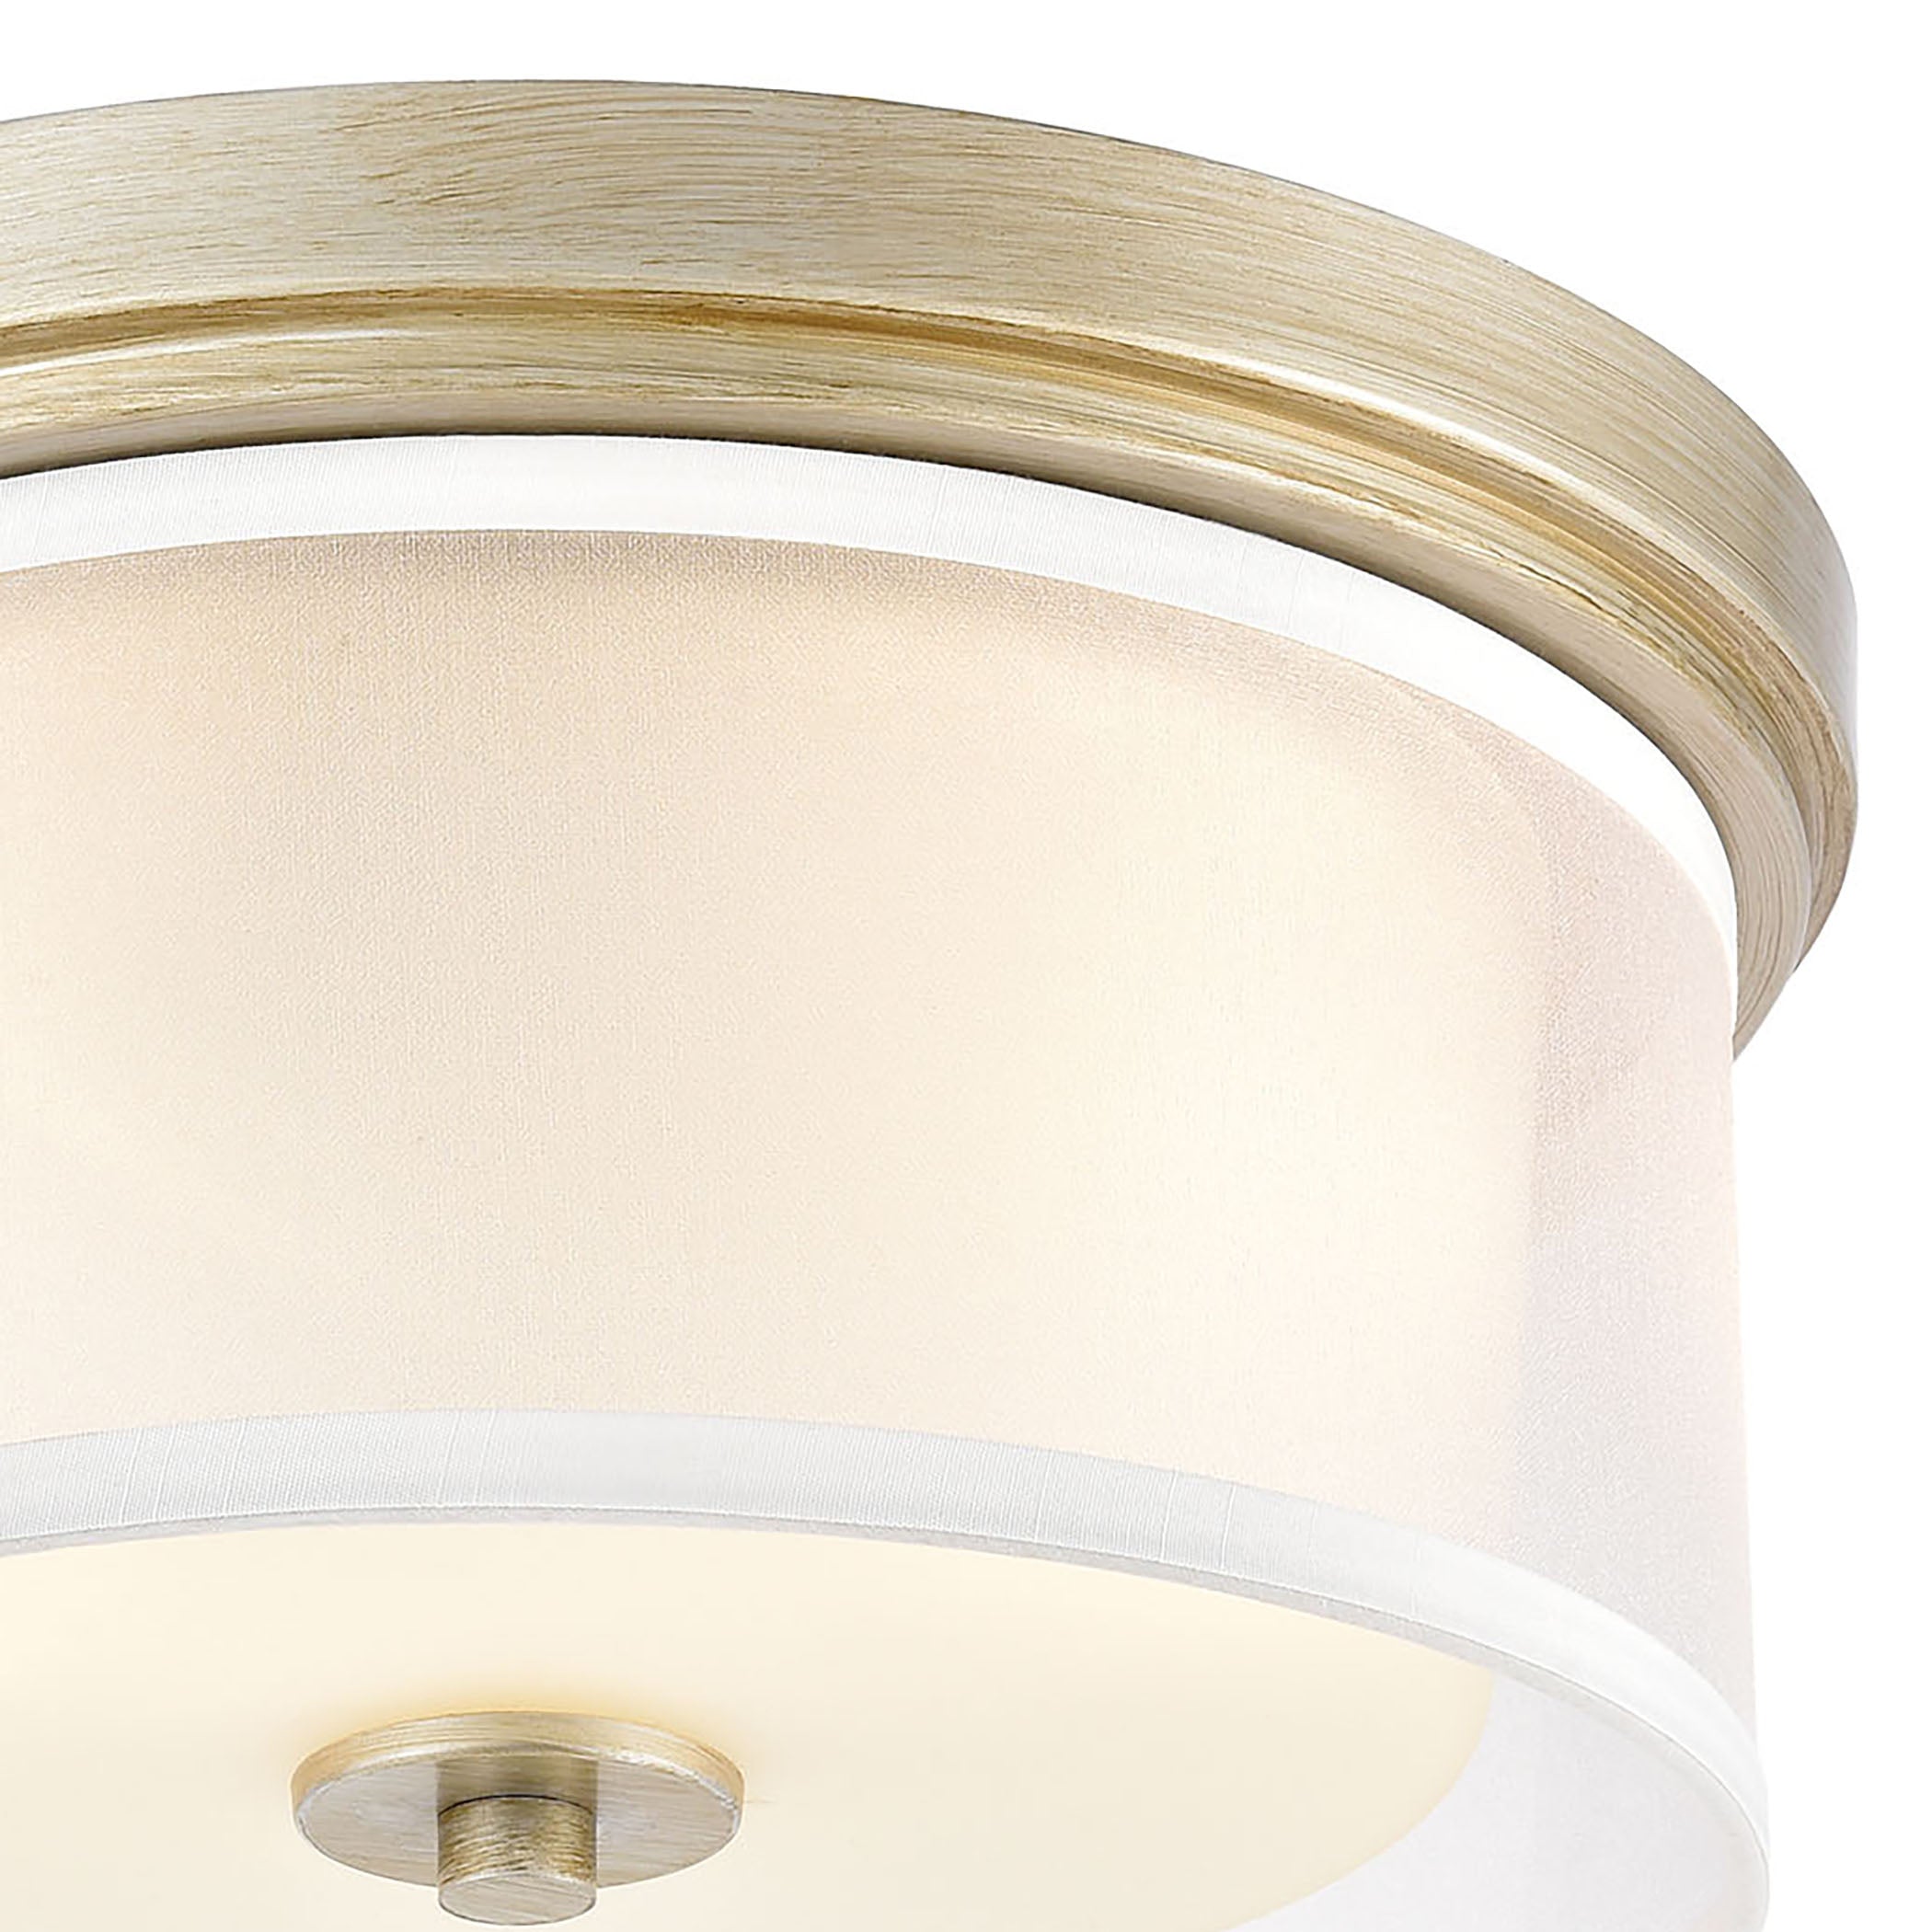 ELK Lighting 57035/2 Diffusion 2-Light Flush Mount in Aged Silver with Frosted Glass inside Silver Organza Shade